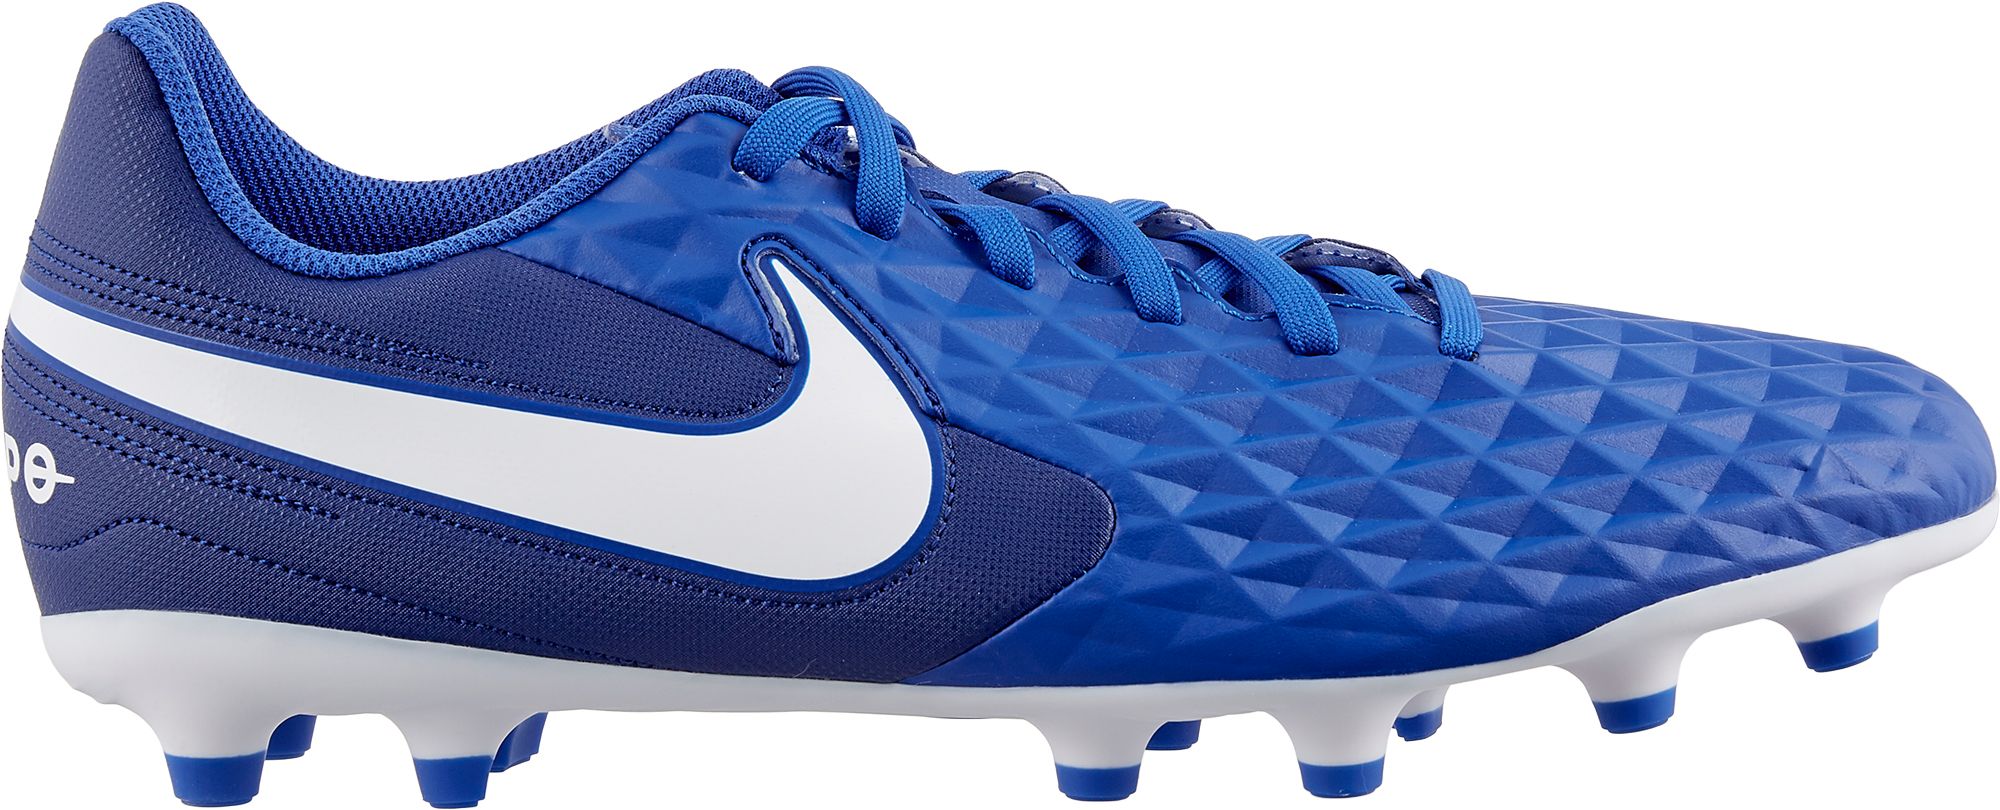 Nike Legend 8 Club TF Soccer shoe for firm ground Sports.